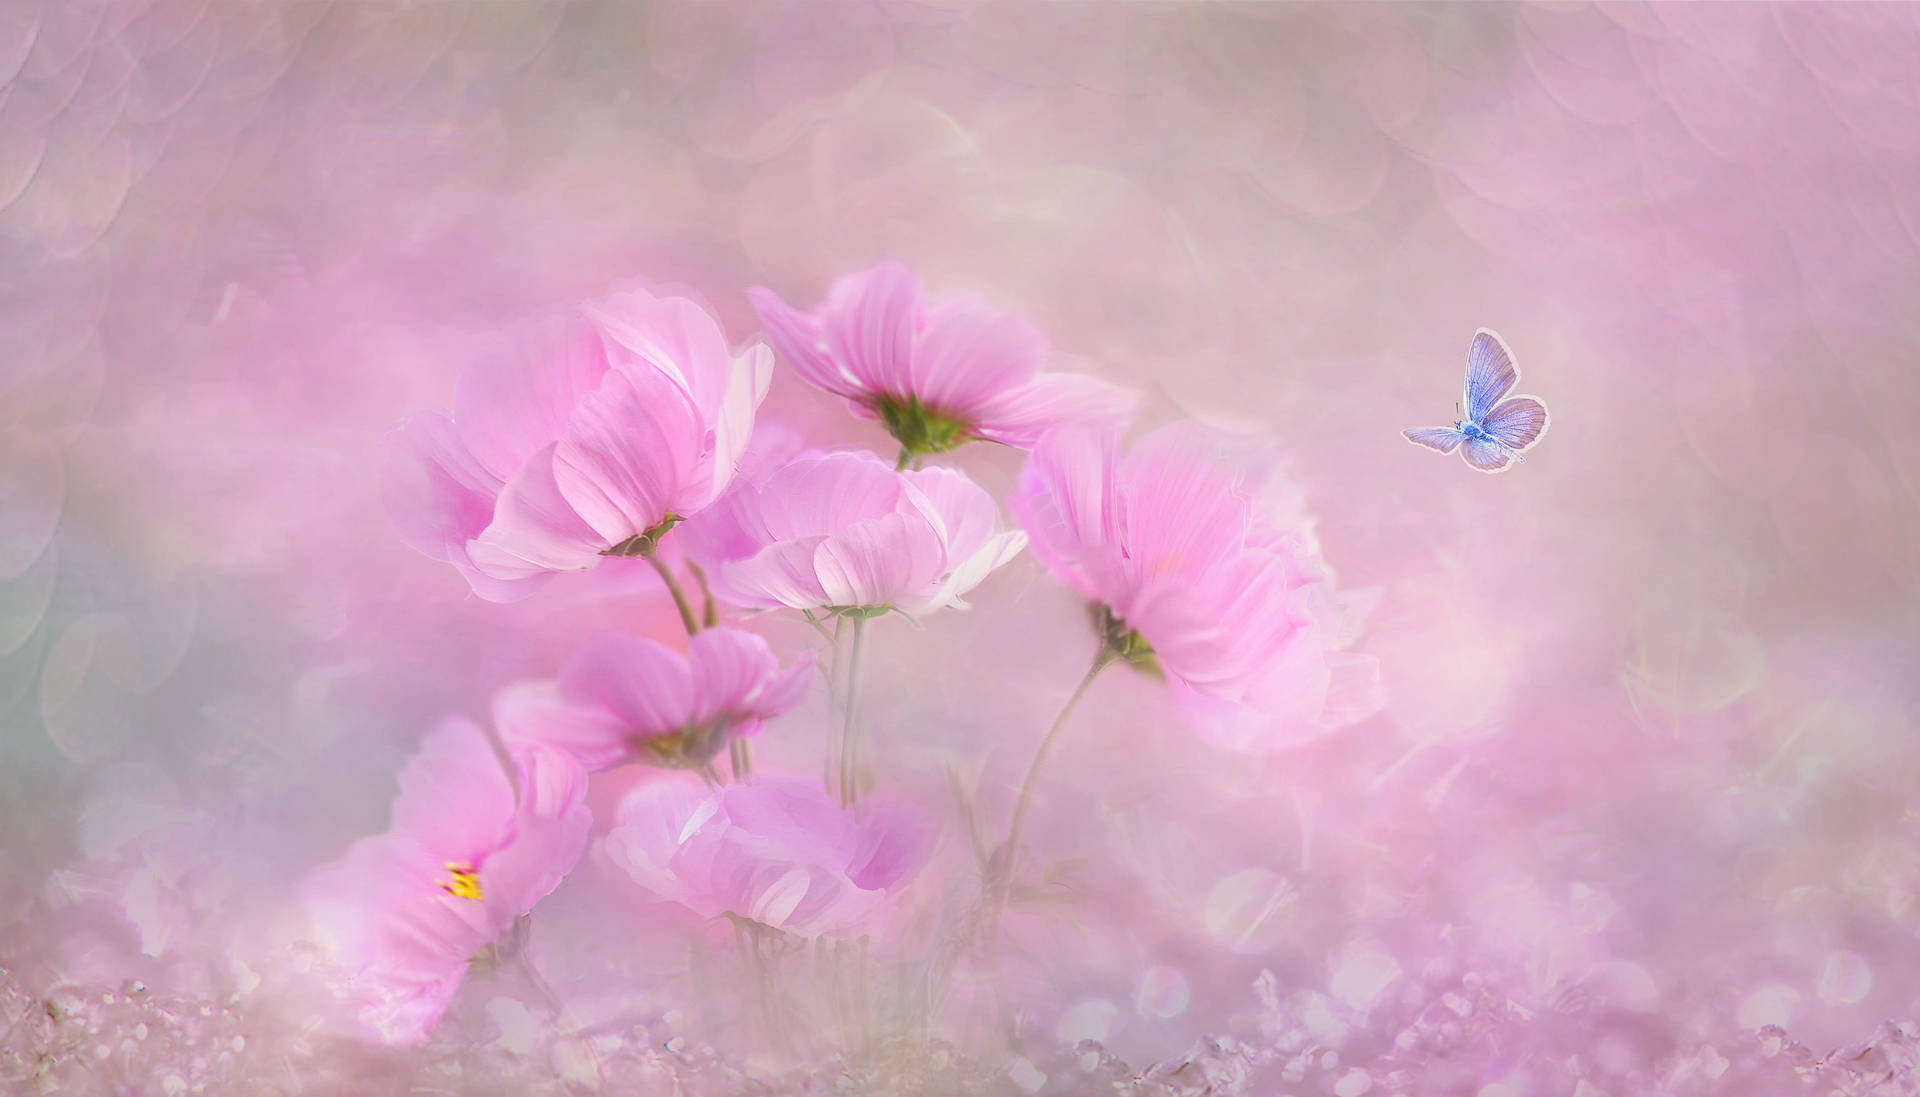 Blue And Cute Pink Butterfly With Flowers Wallpaper